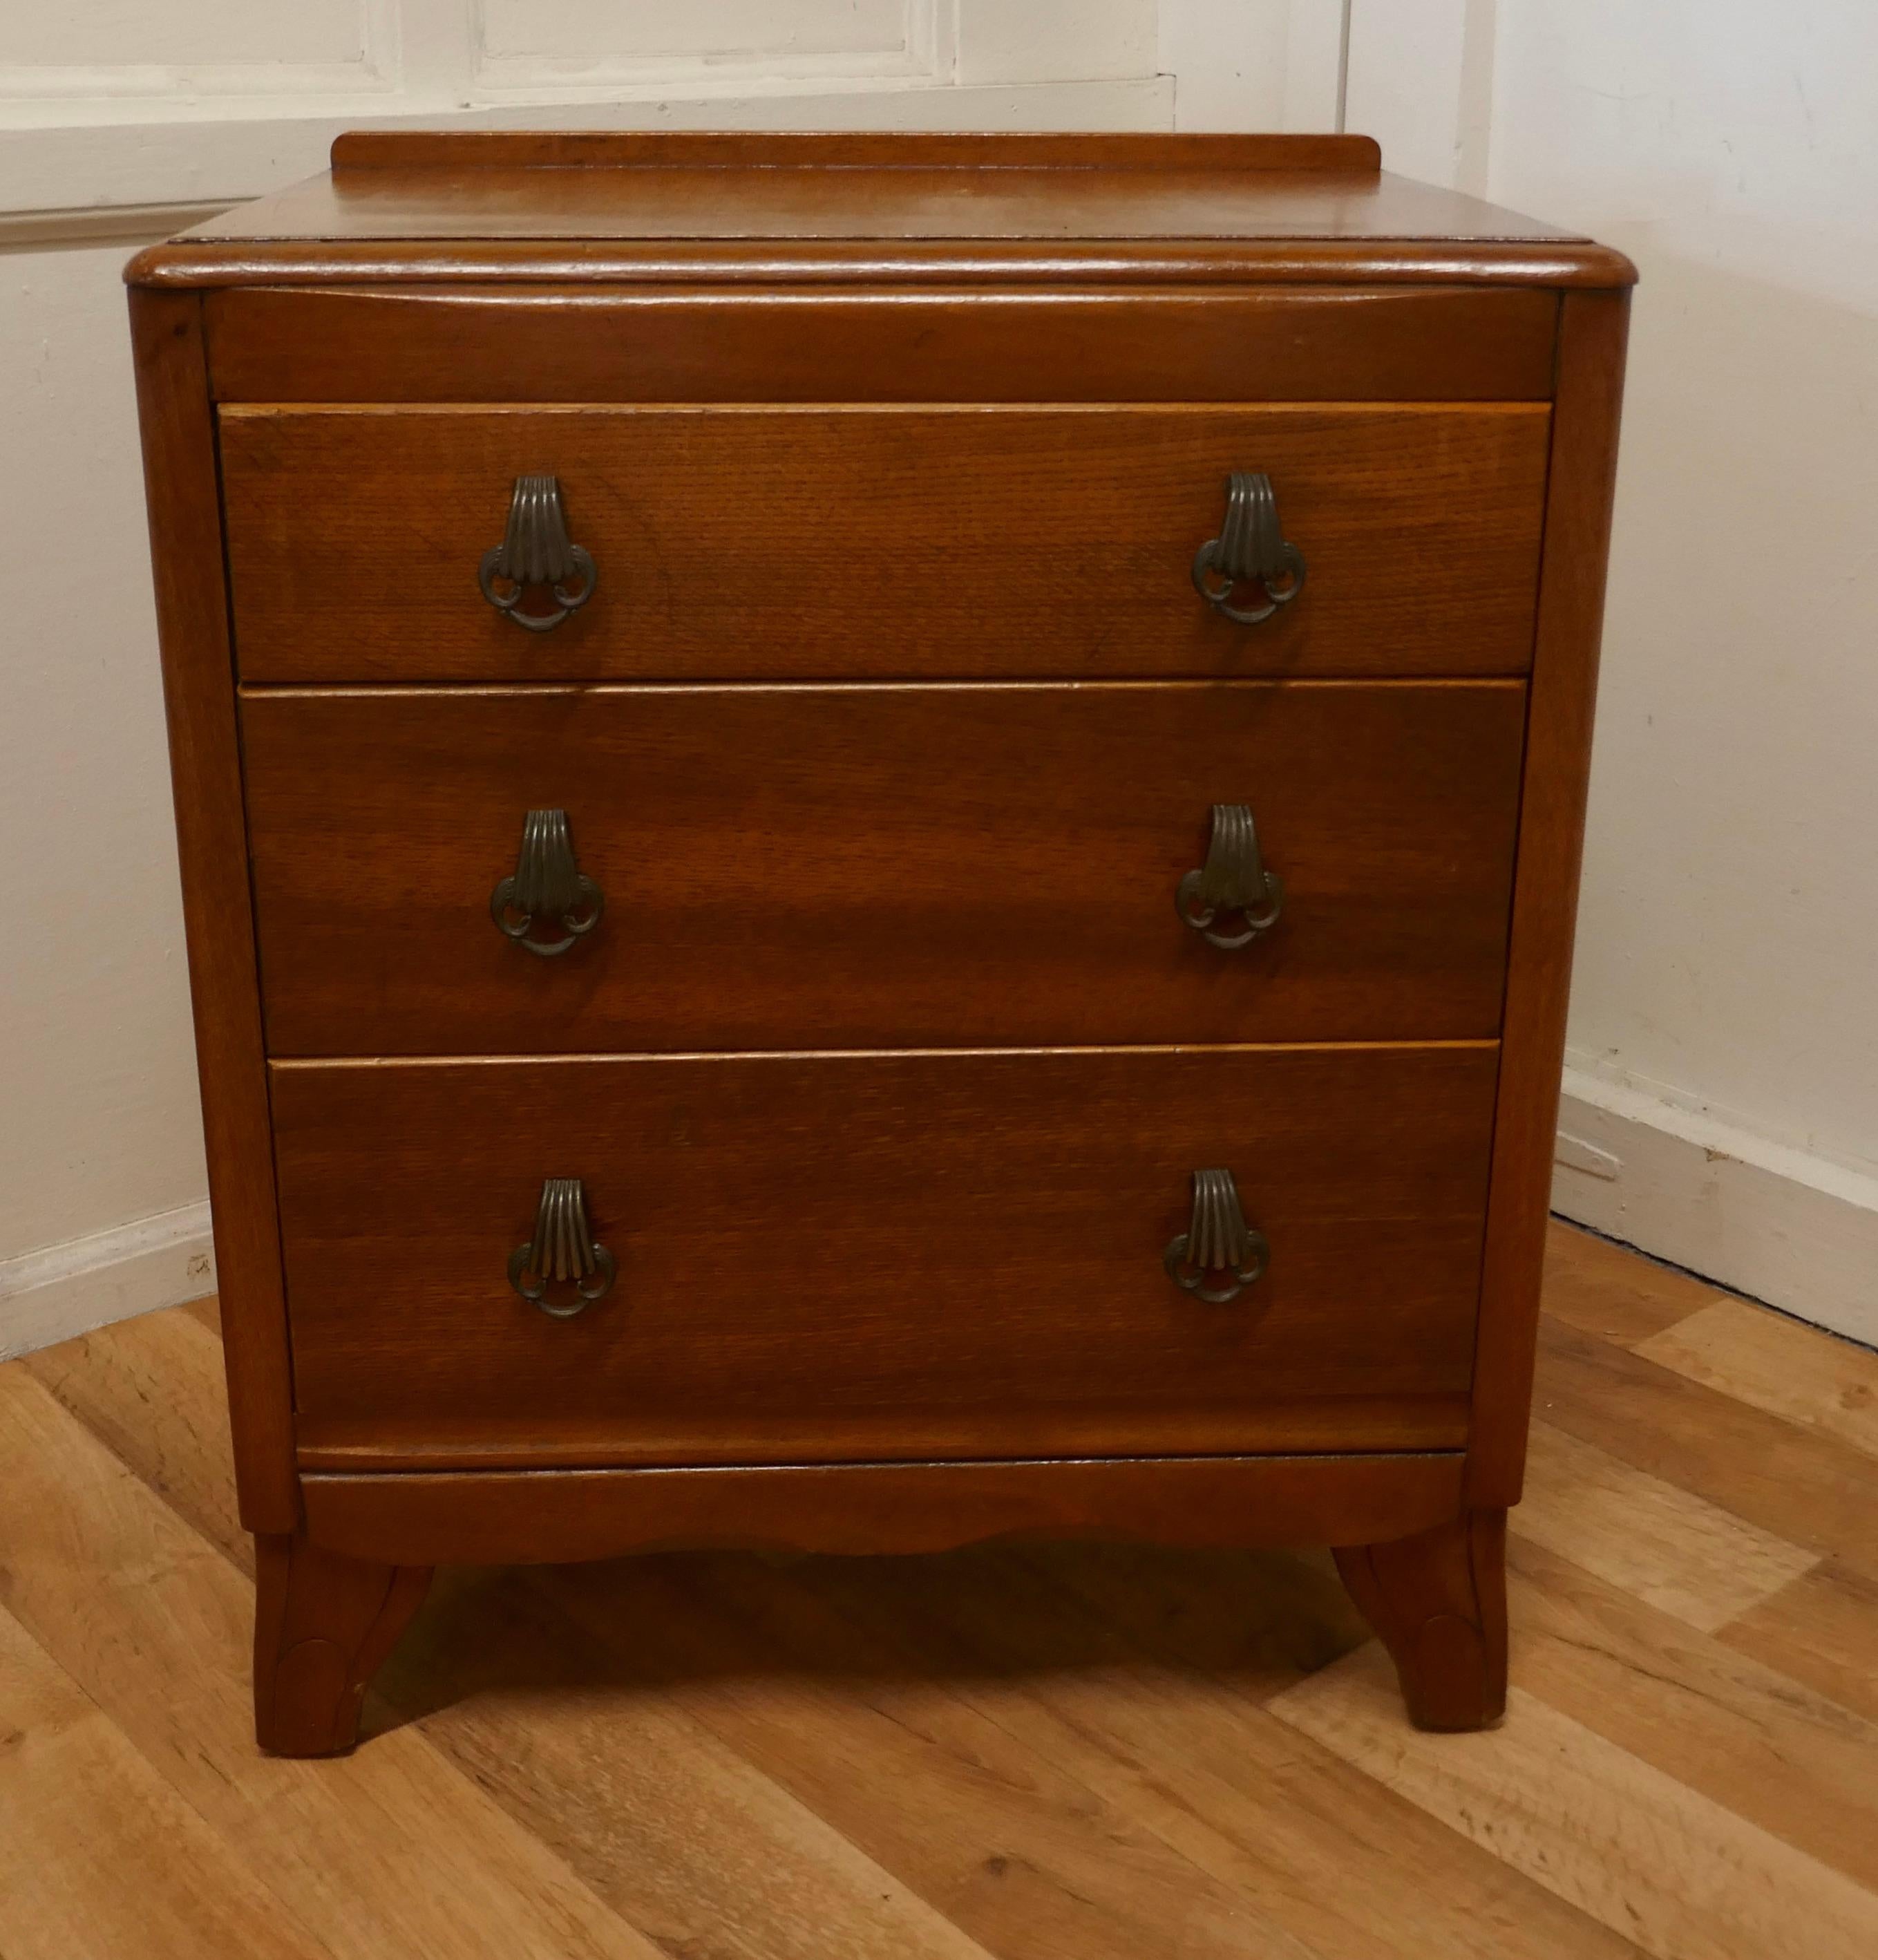 Art Deco Golden Oak Chest of Drawers by Lebus

This is a Classic piece of Oak Furniture from the 1930/40 Art Deco period, the chest has a slight curve to the top with a moulded edge 
The 3 long drawers have sturdy decorative handles and it stands